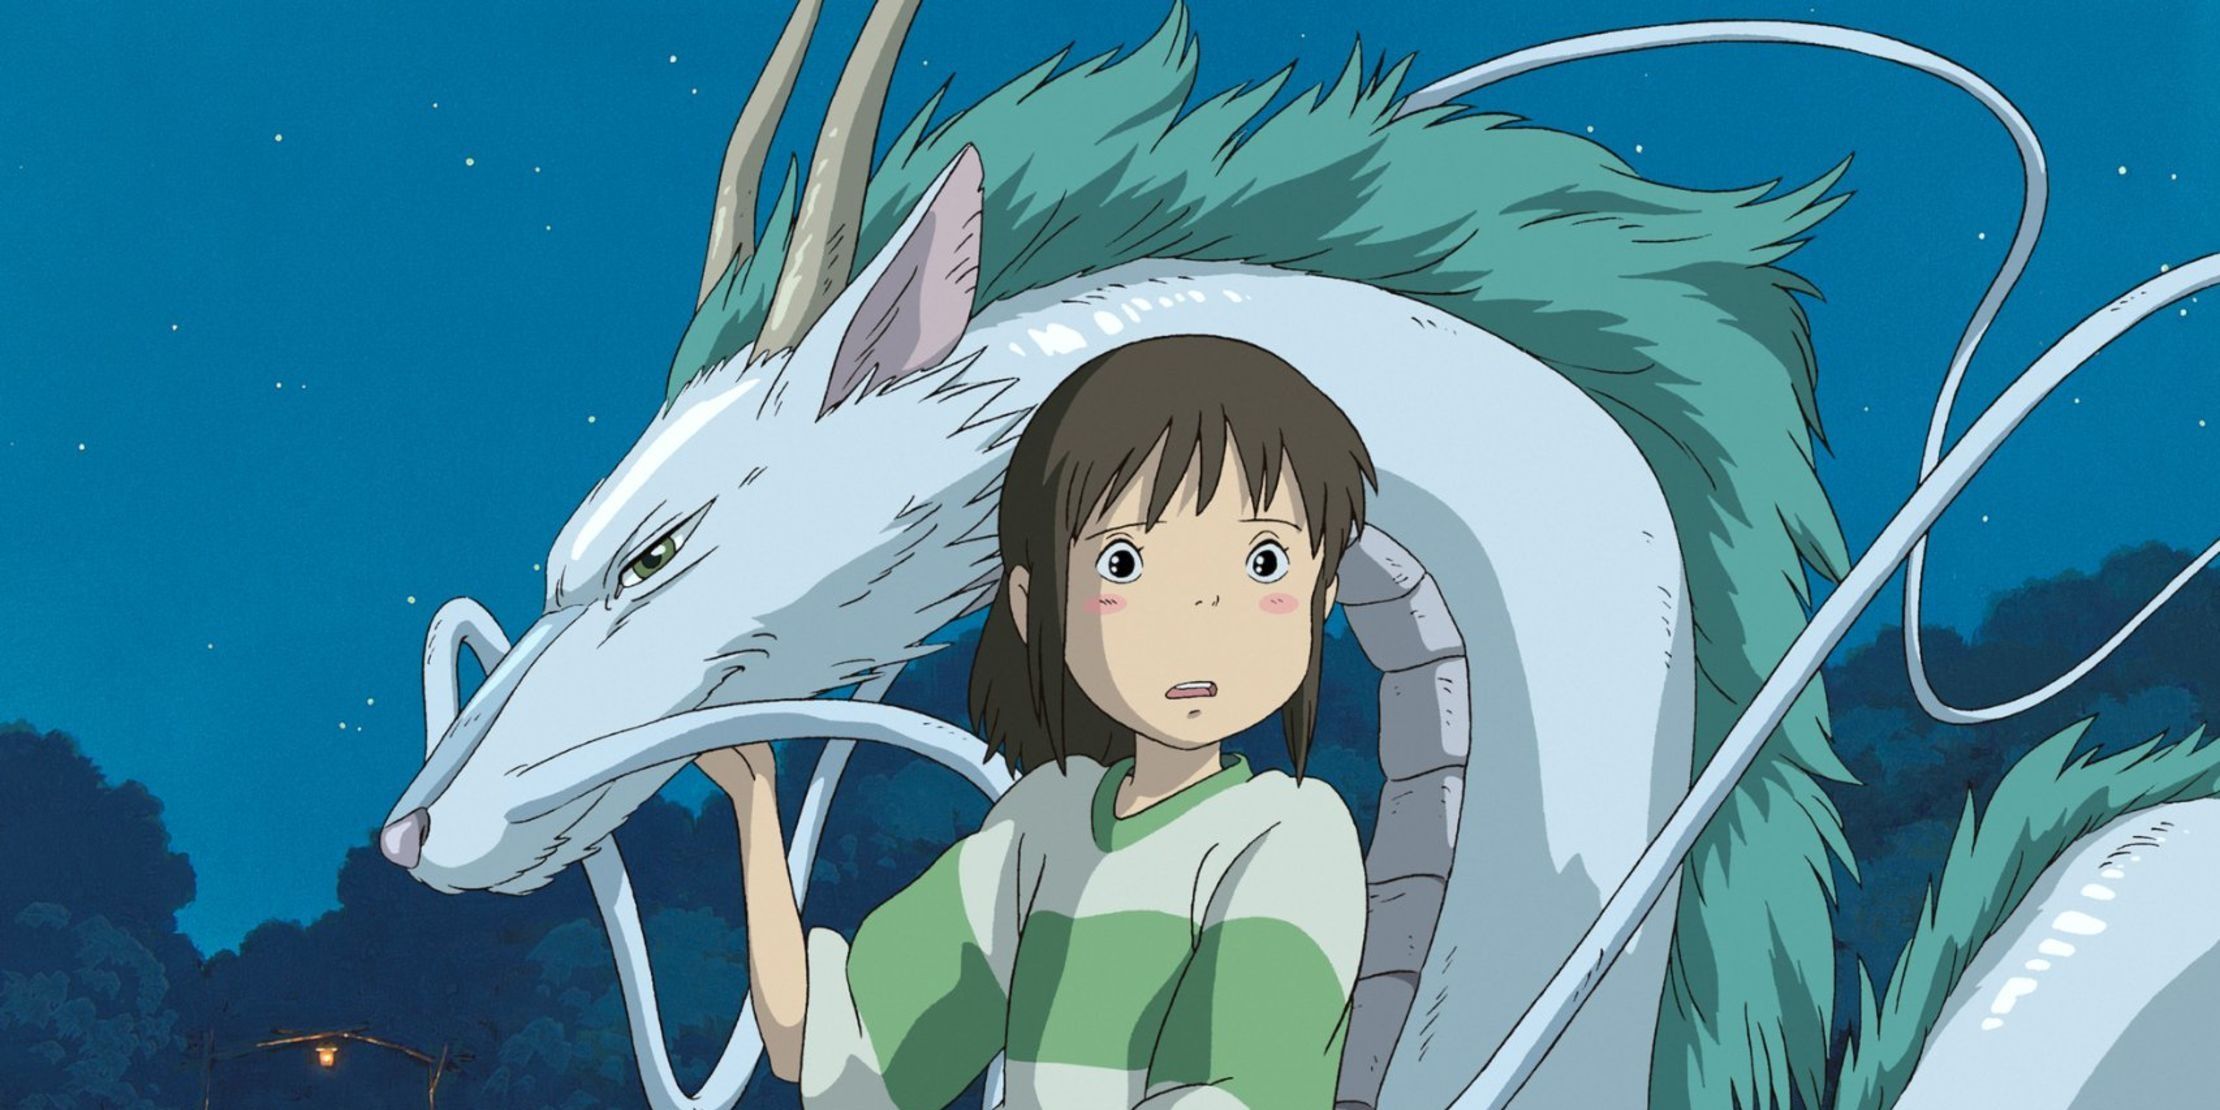 Chihiro looking surprised while being with Haku in his dragon form in Spirited Away